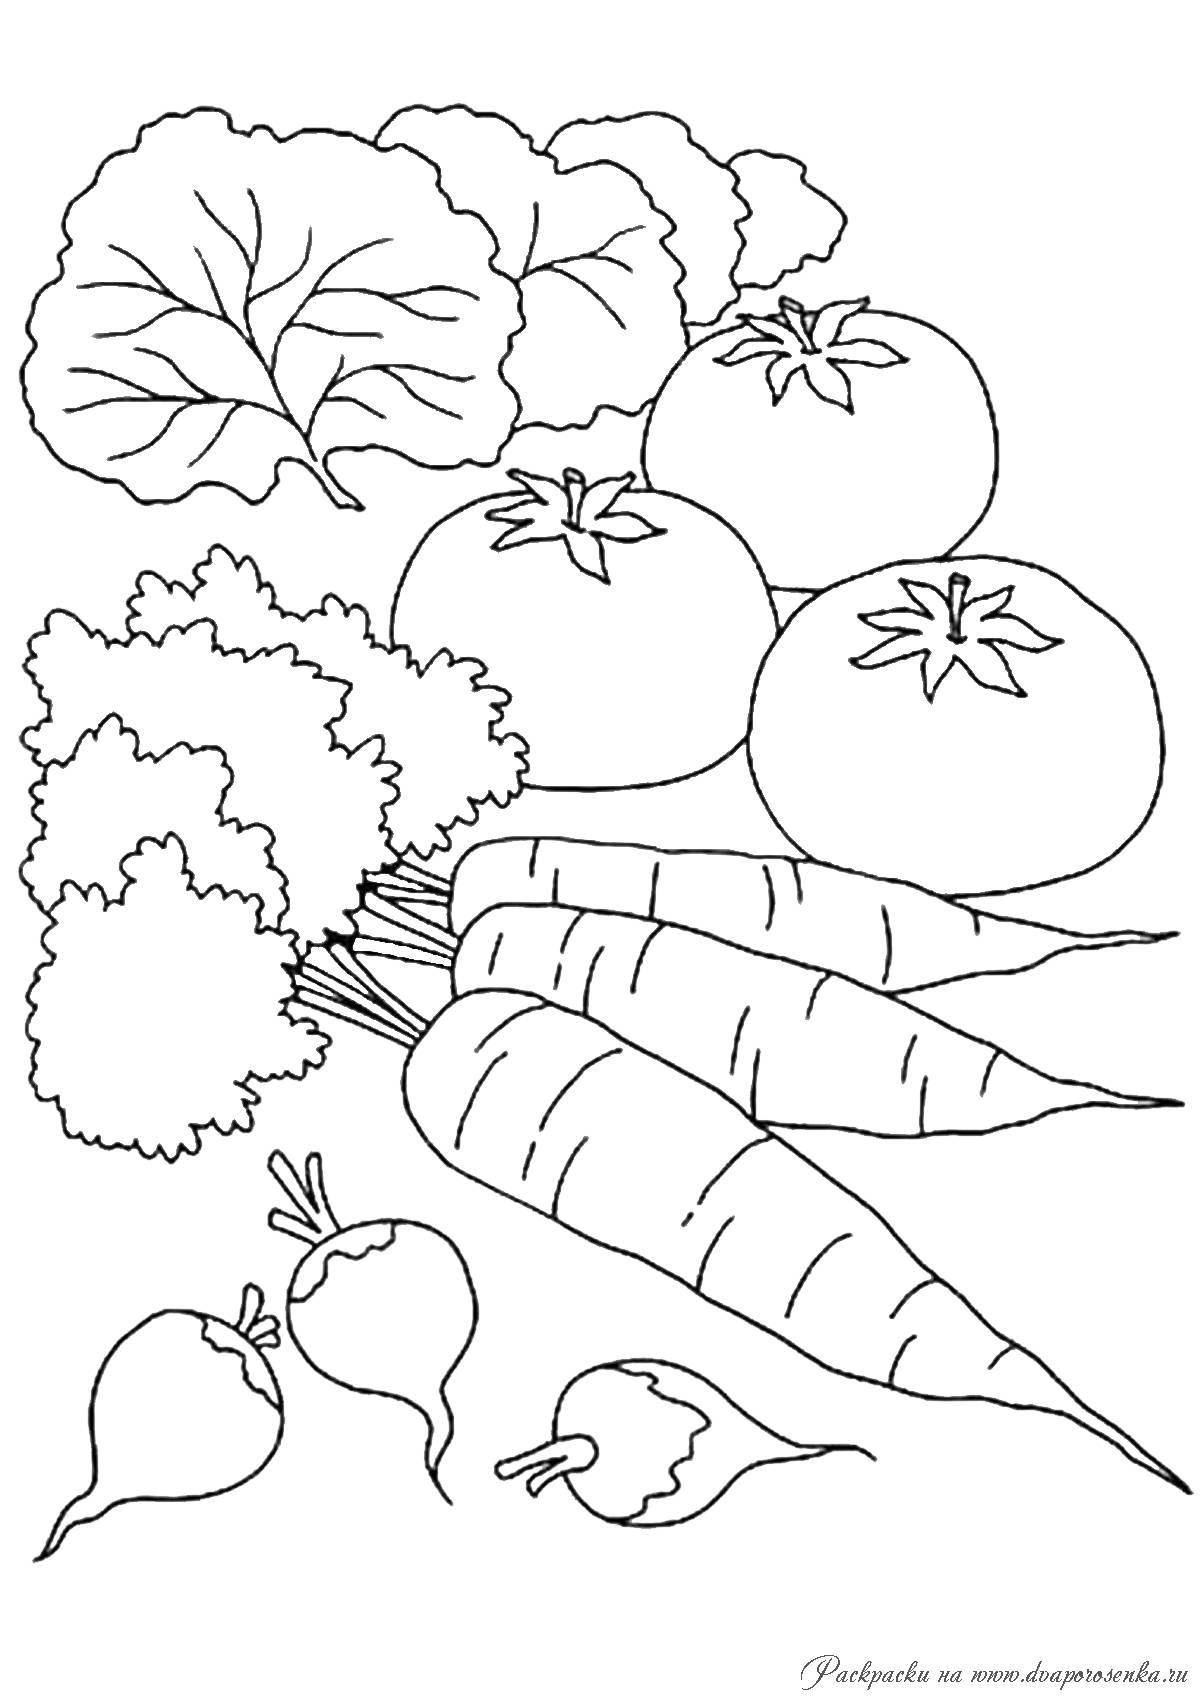 Fun vegetable coloring book for 3-4 year olds